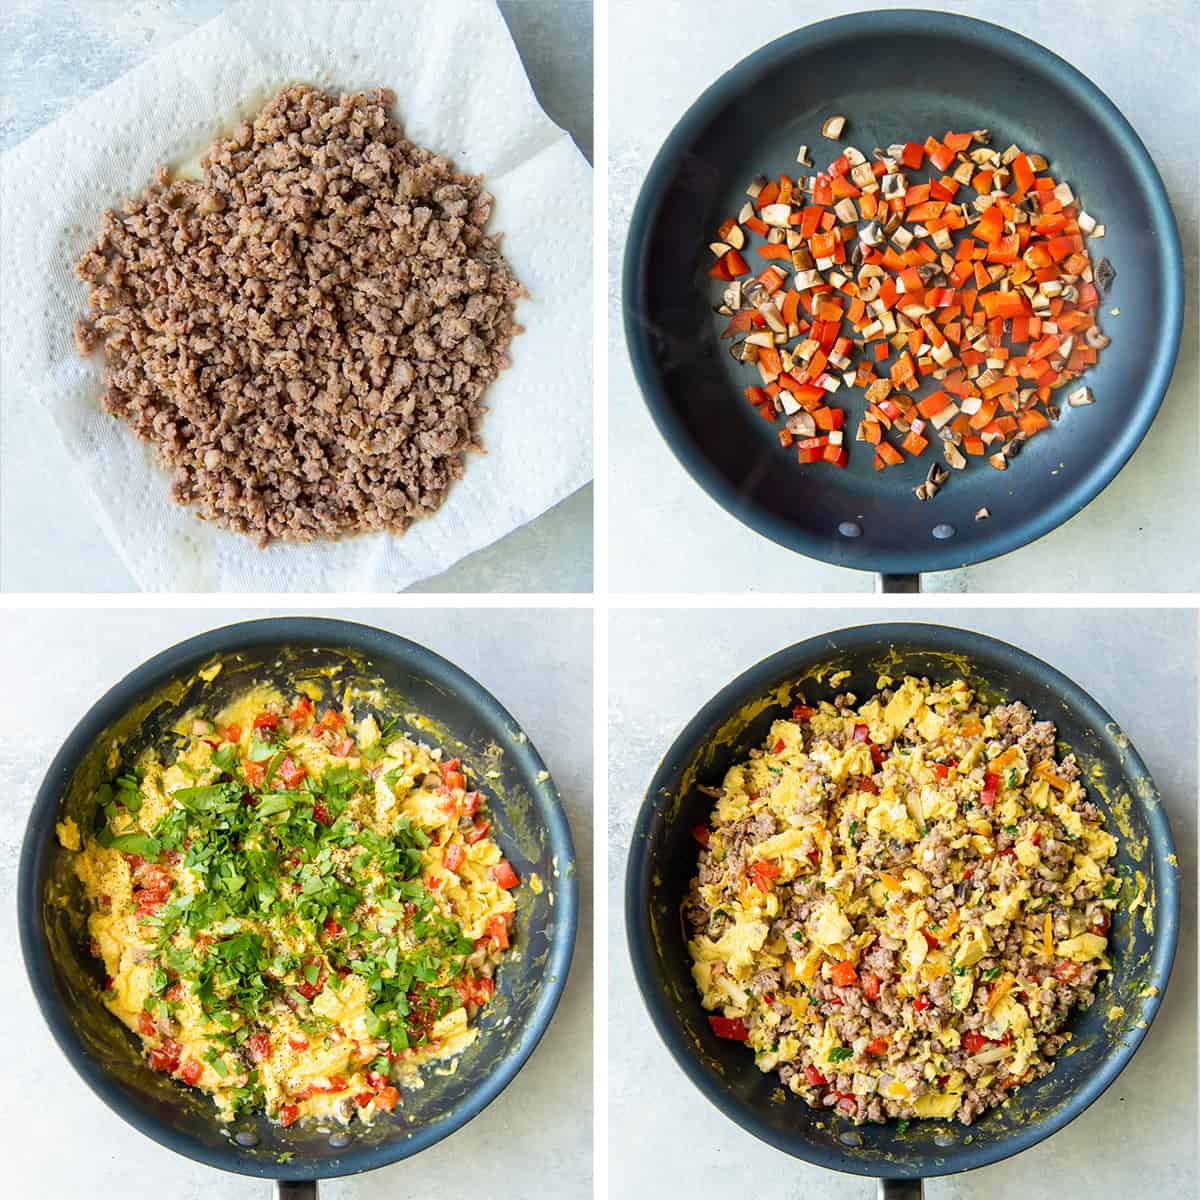 Four images showing a sausage, egg, and bell pepper mixture being cooked in a skillet.